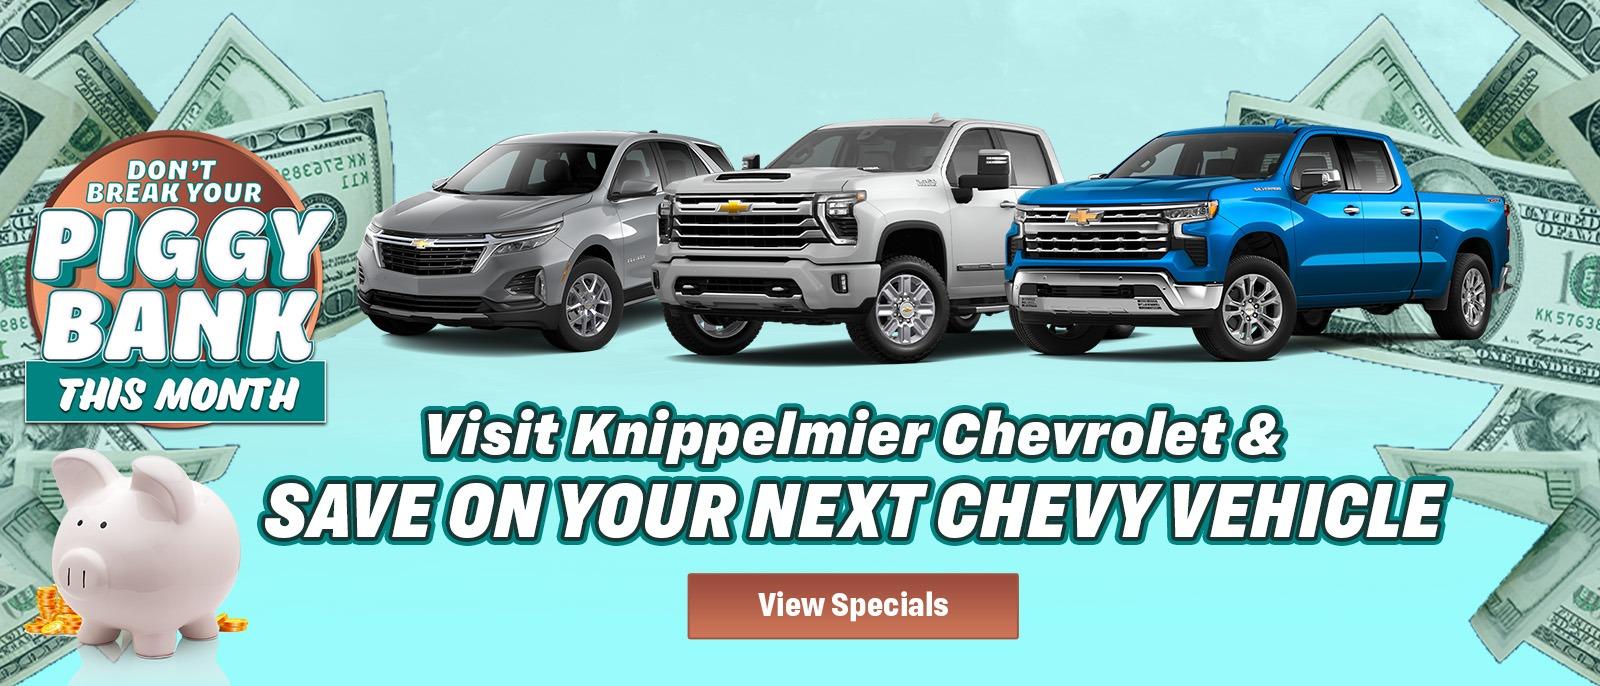 Save on your Next Chevy Vehicle